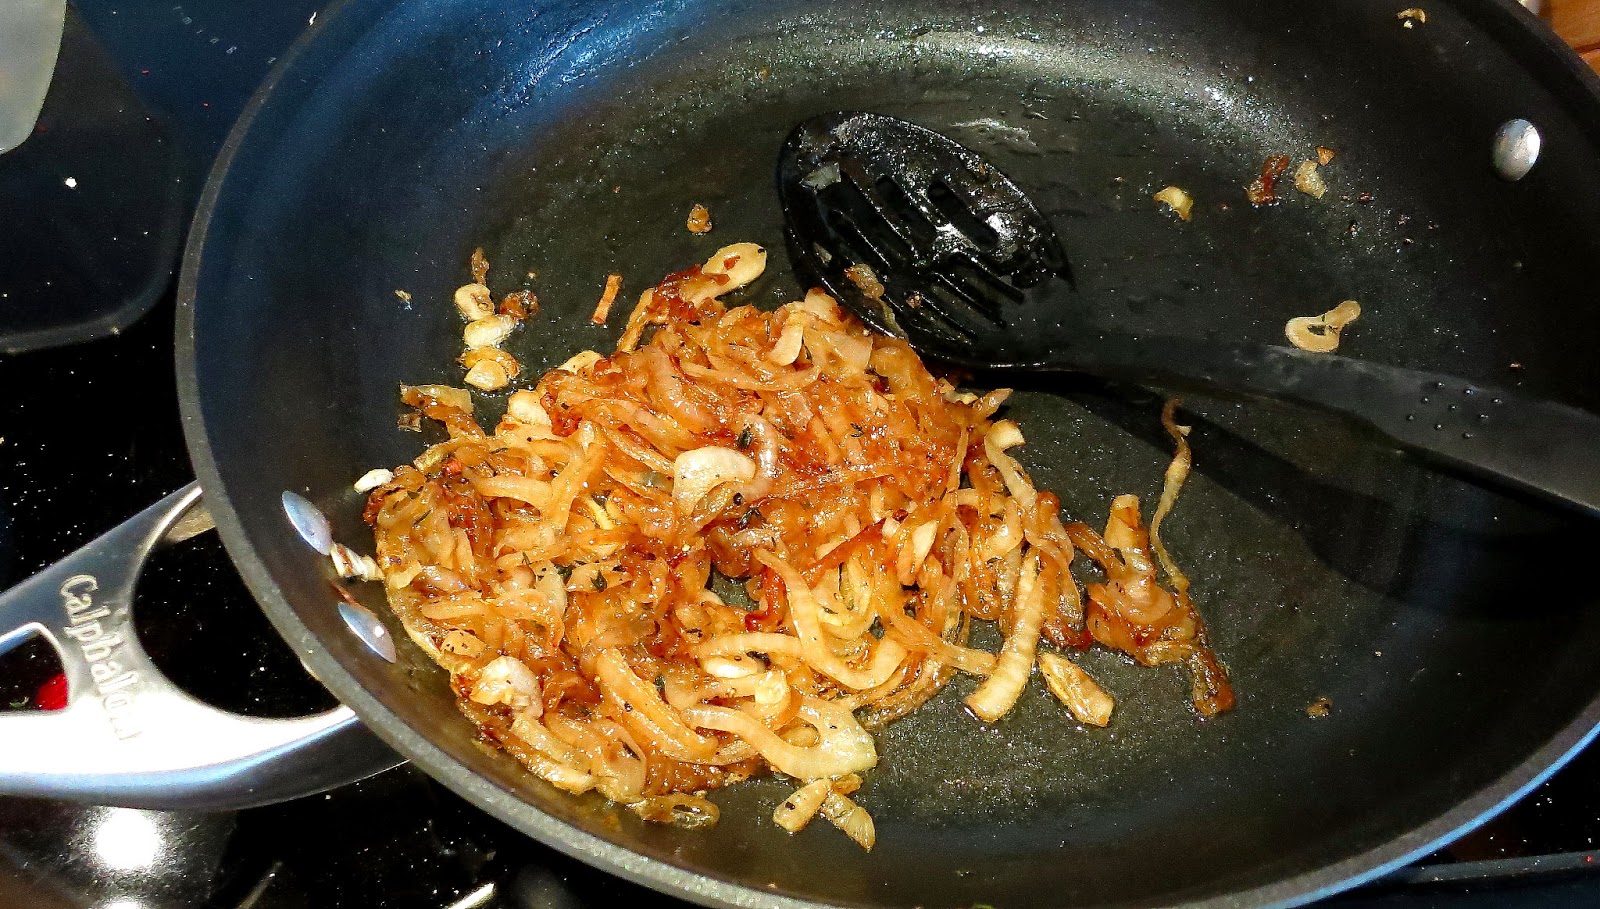 A pan of caramelized onions.